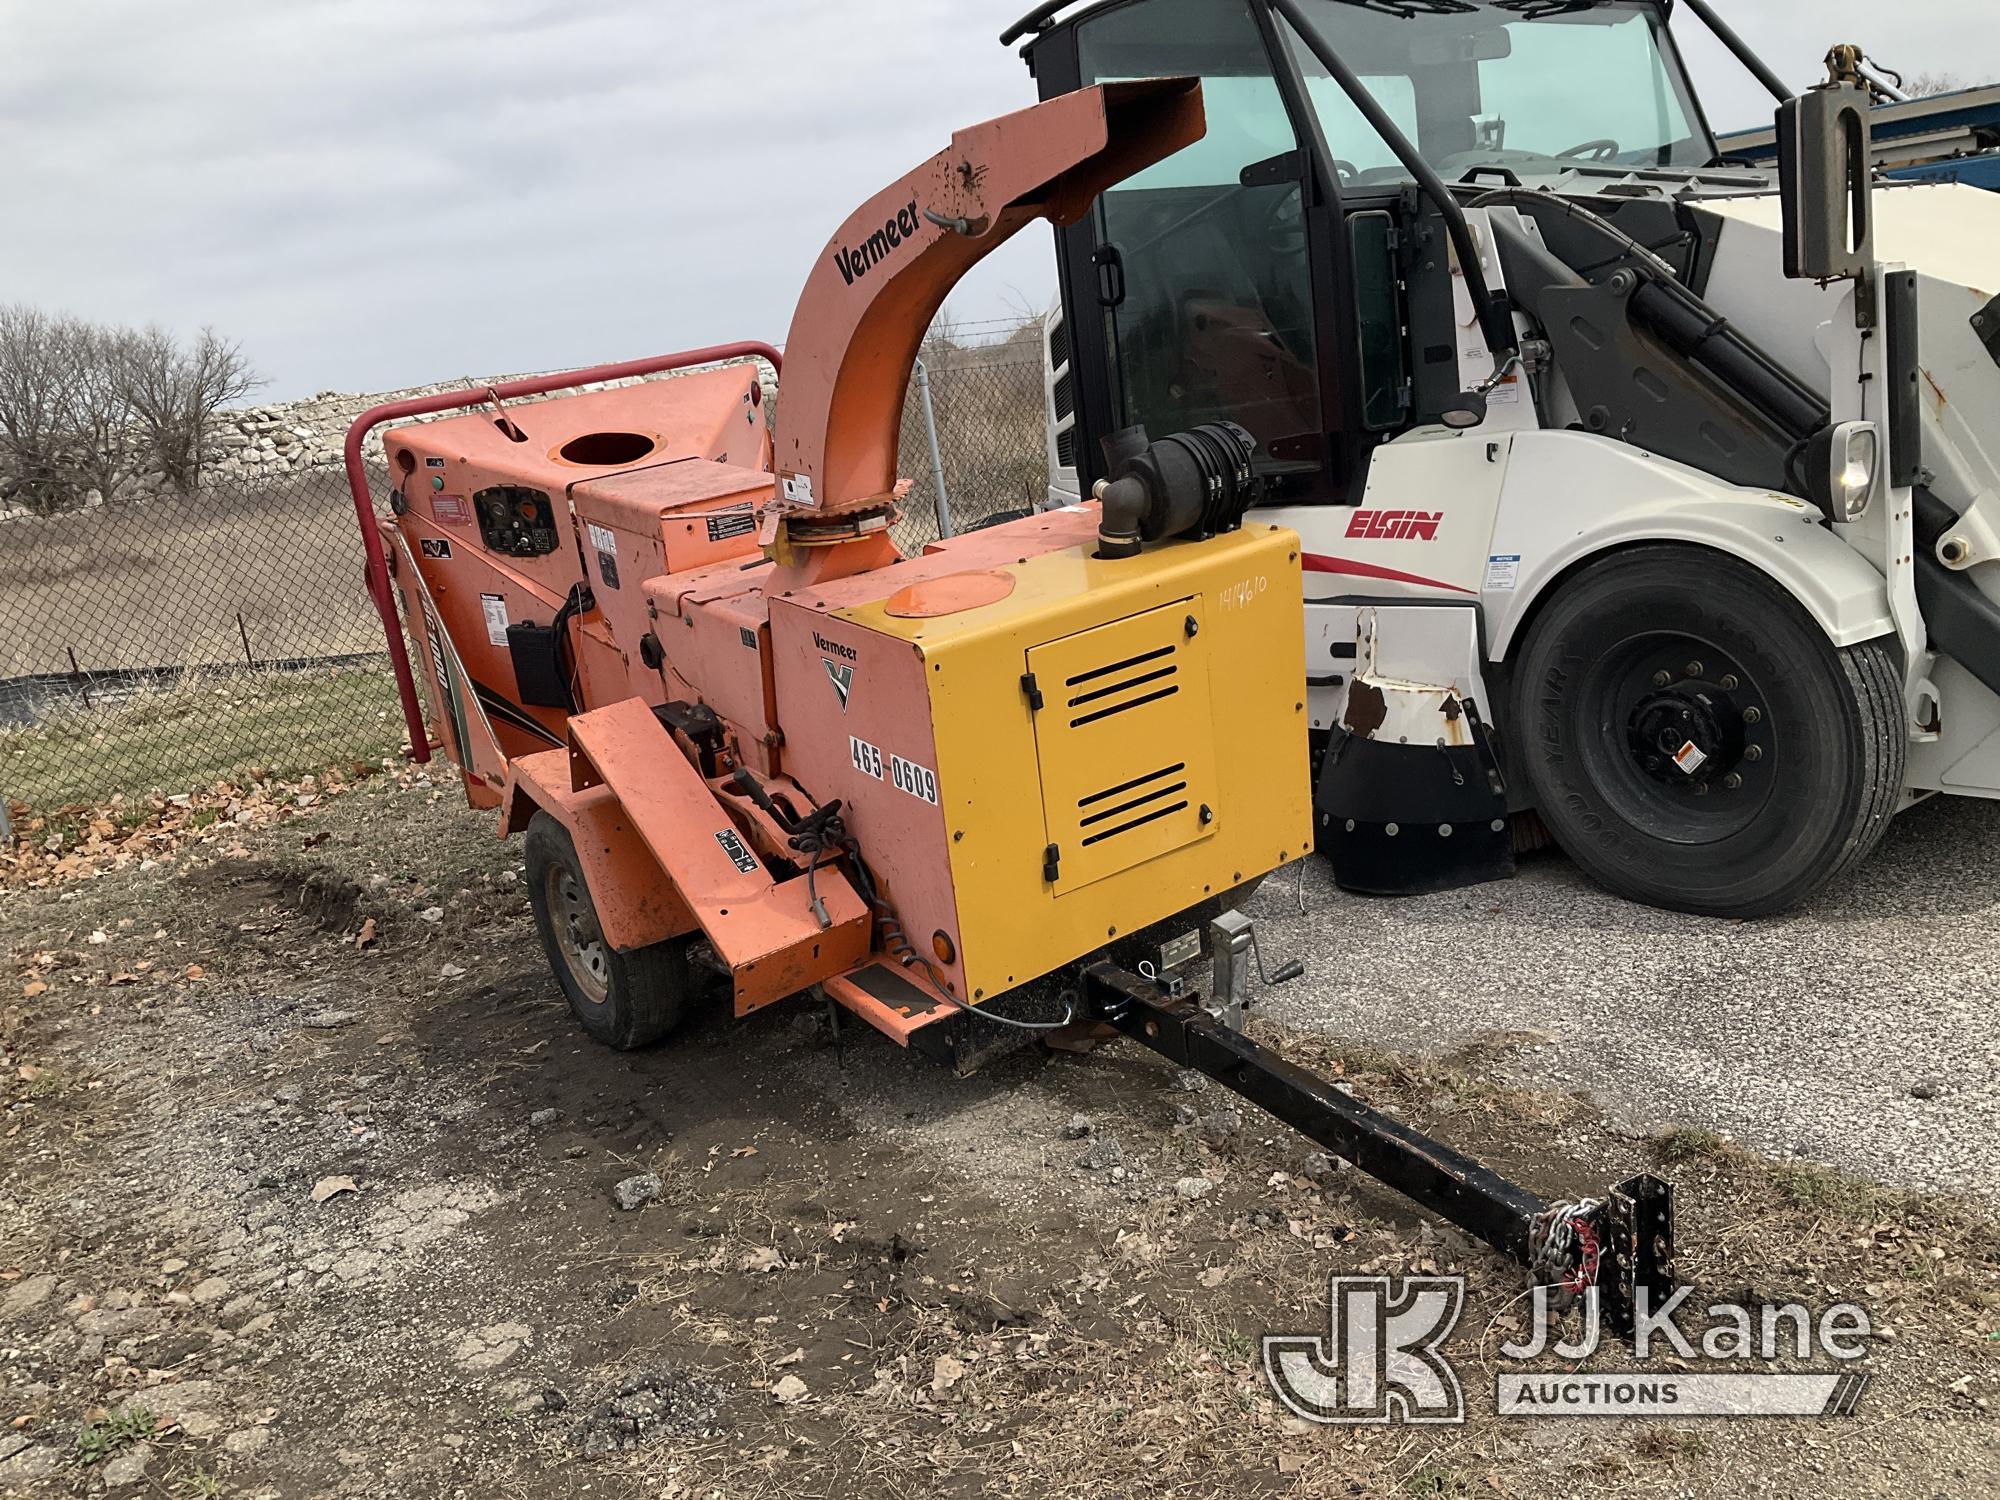 (Kansas City, MO) 2010 Vermeer BC1000XL Chipper (12in Drum) No Title) (Not Running, Condition Unknow